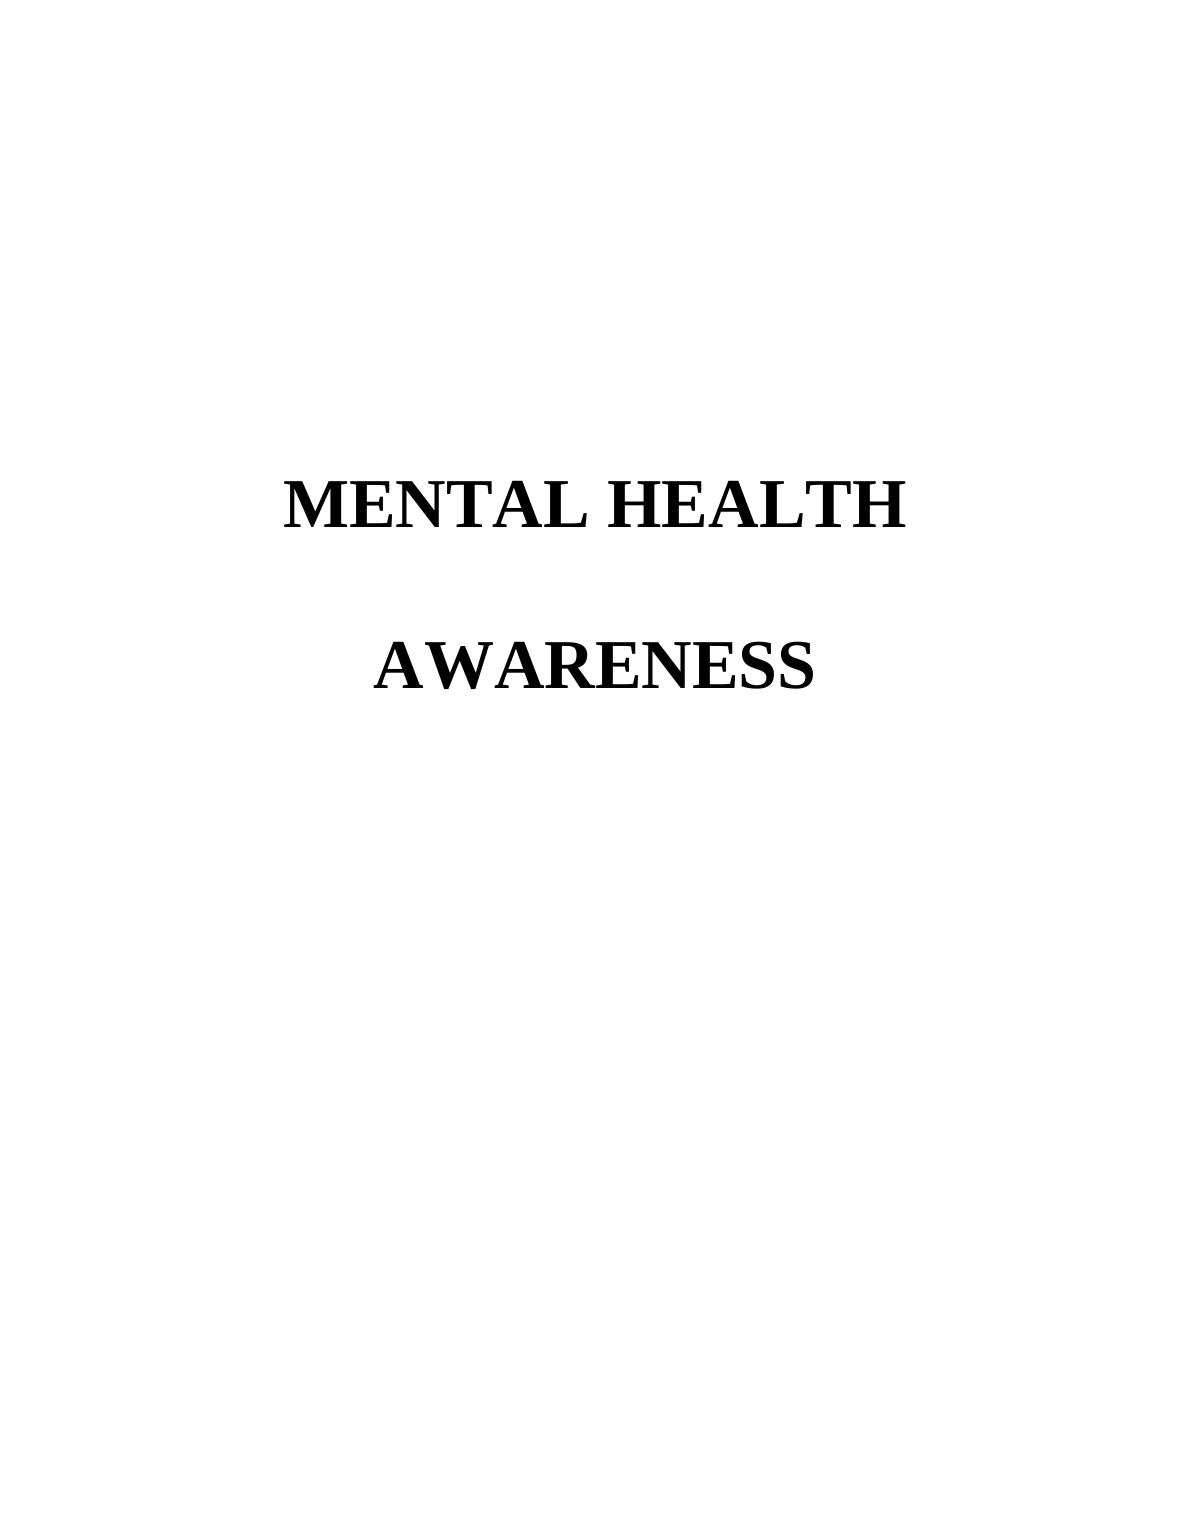 assignment of mental health